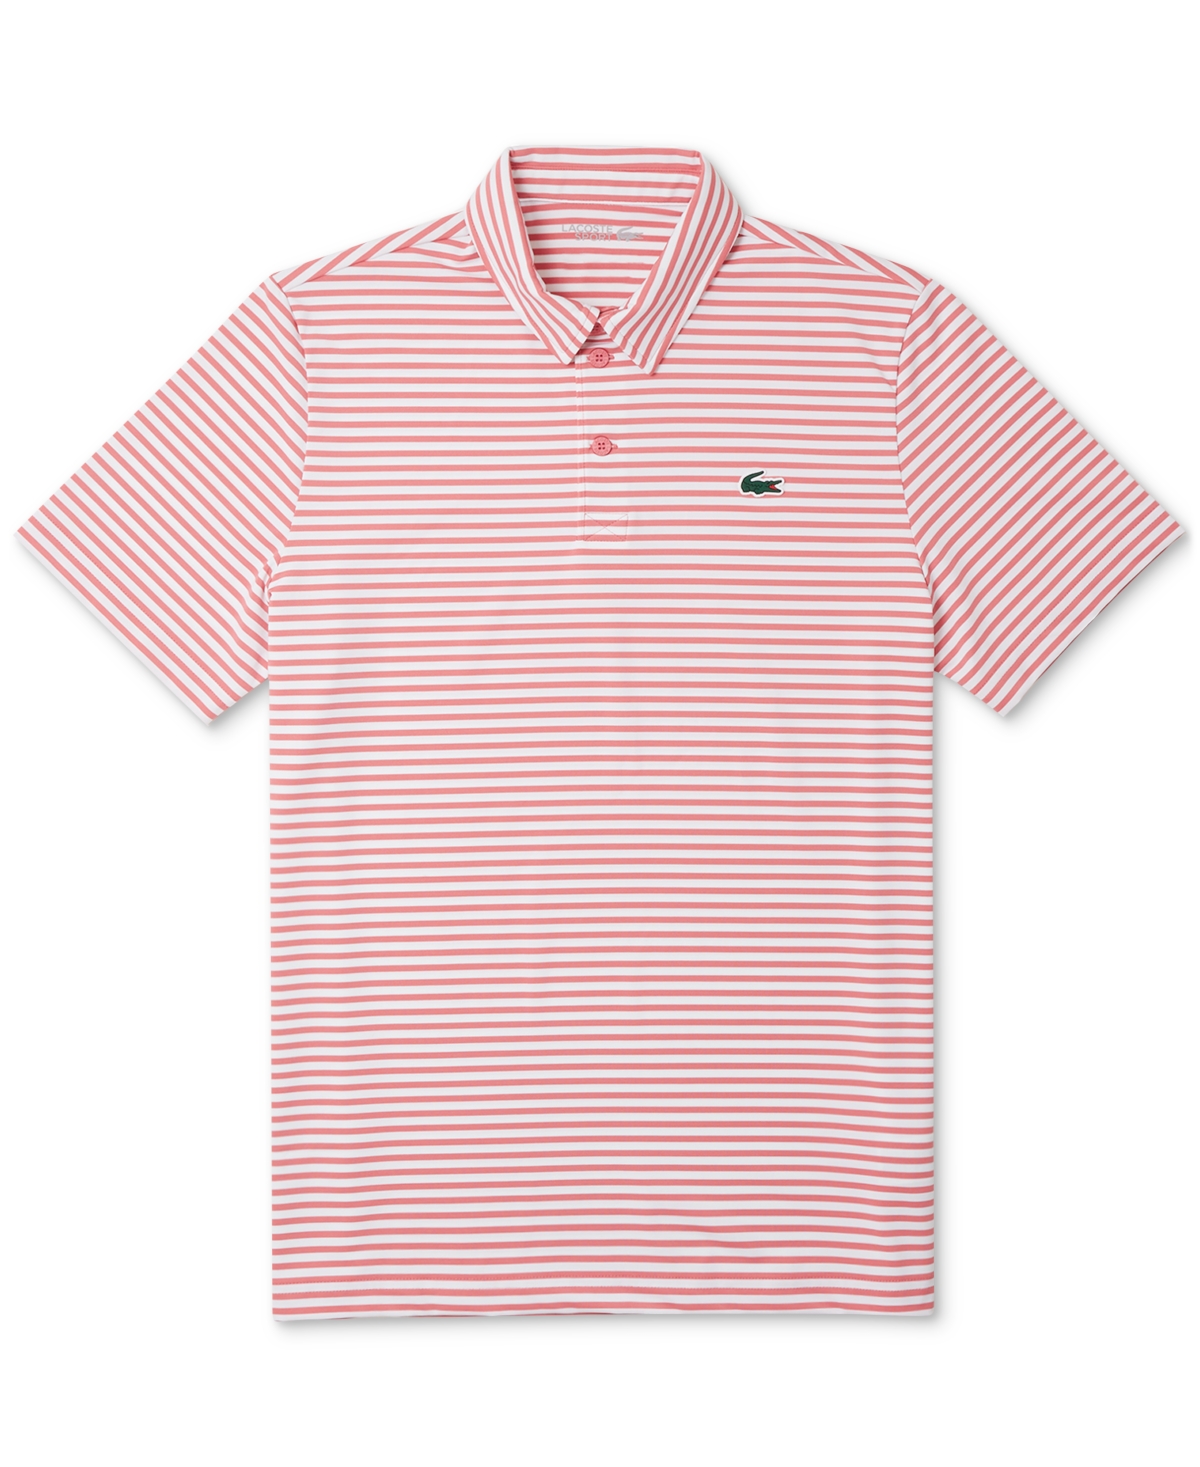 Lacoste Men's Short Sleeve Striped Performance Polo Shirt In Nx Capitaine,ladigue